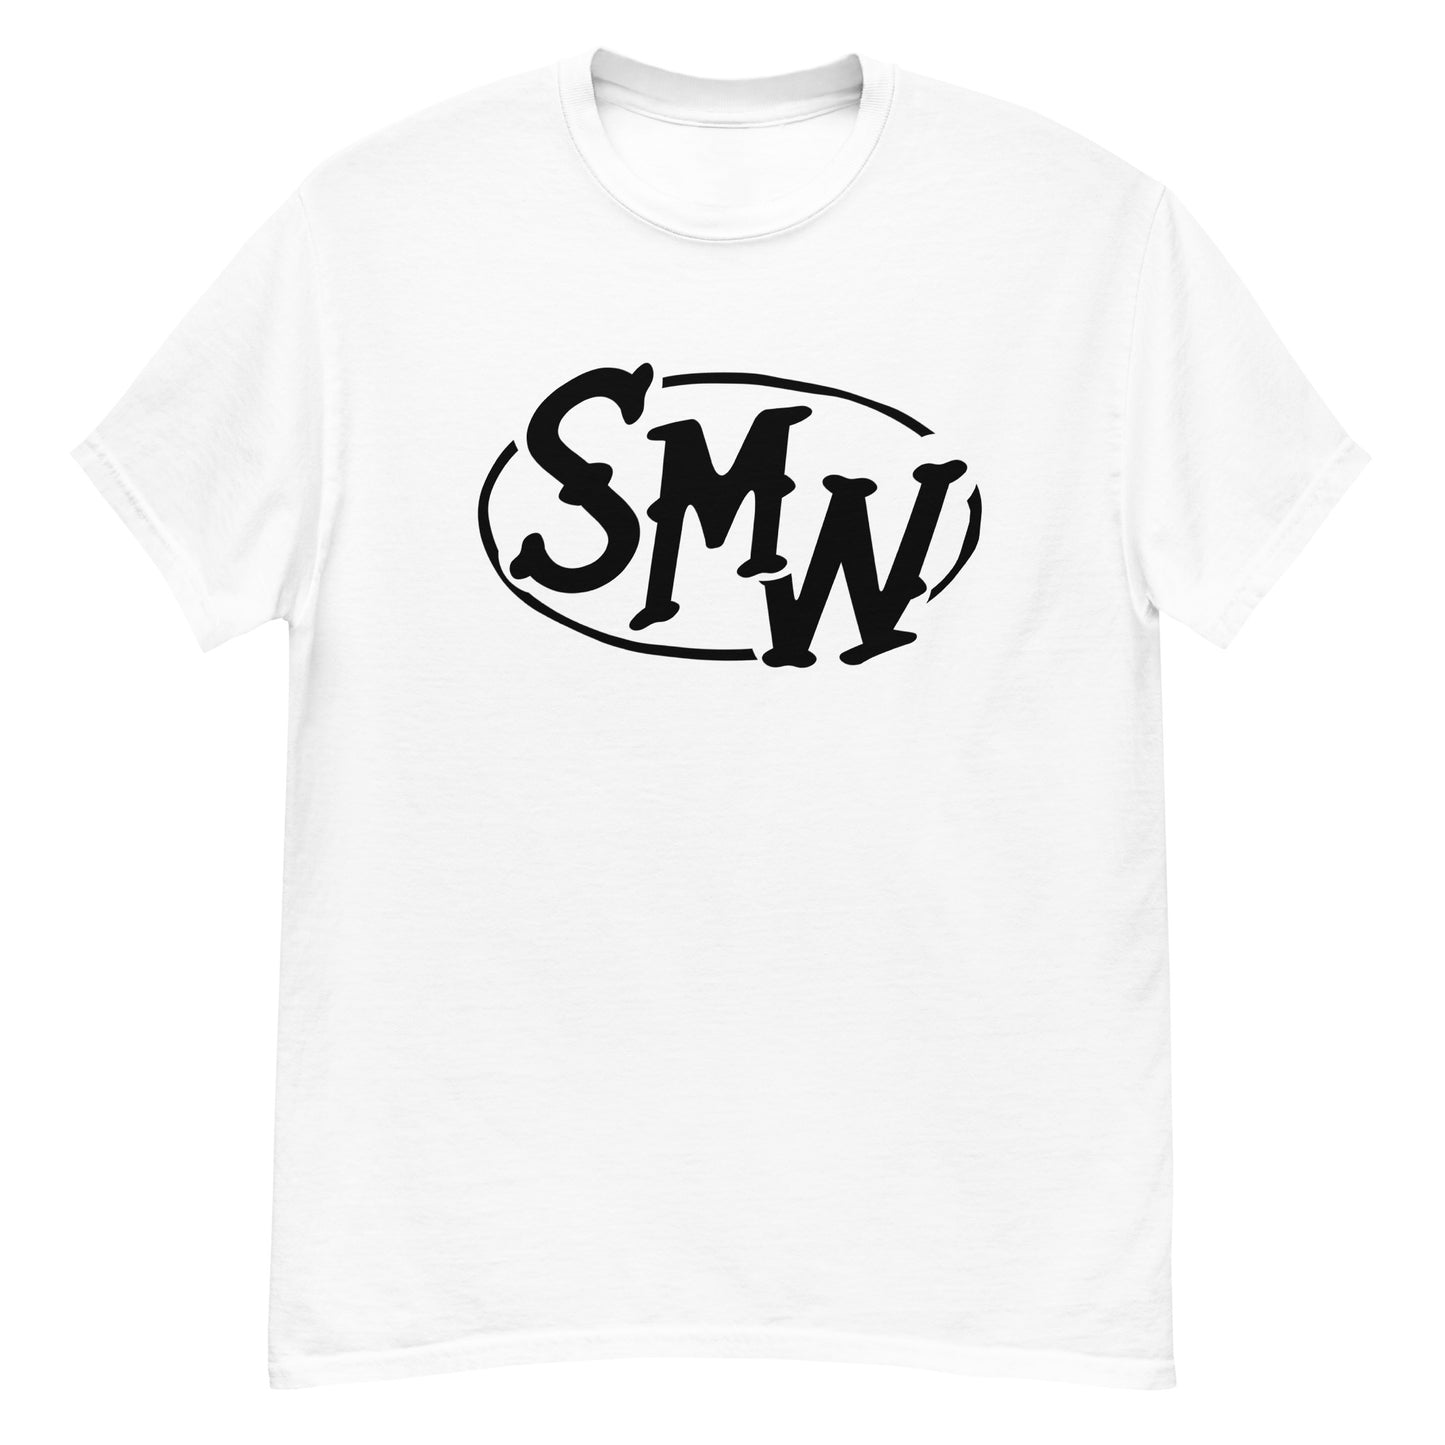 SMW (Suck My What?) Ranch Hand Oval Men's Classic Tee (Blk Graphic)